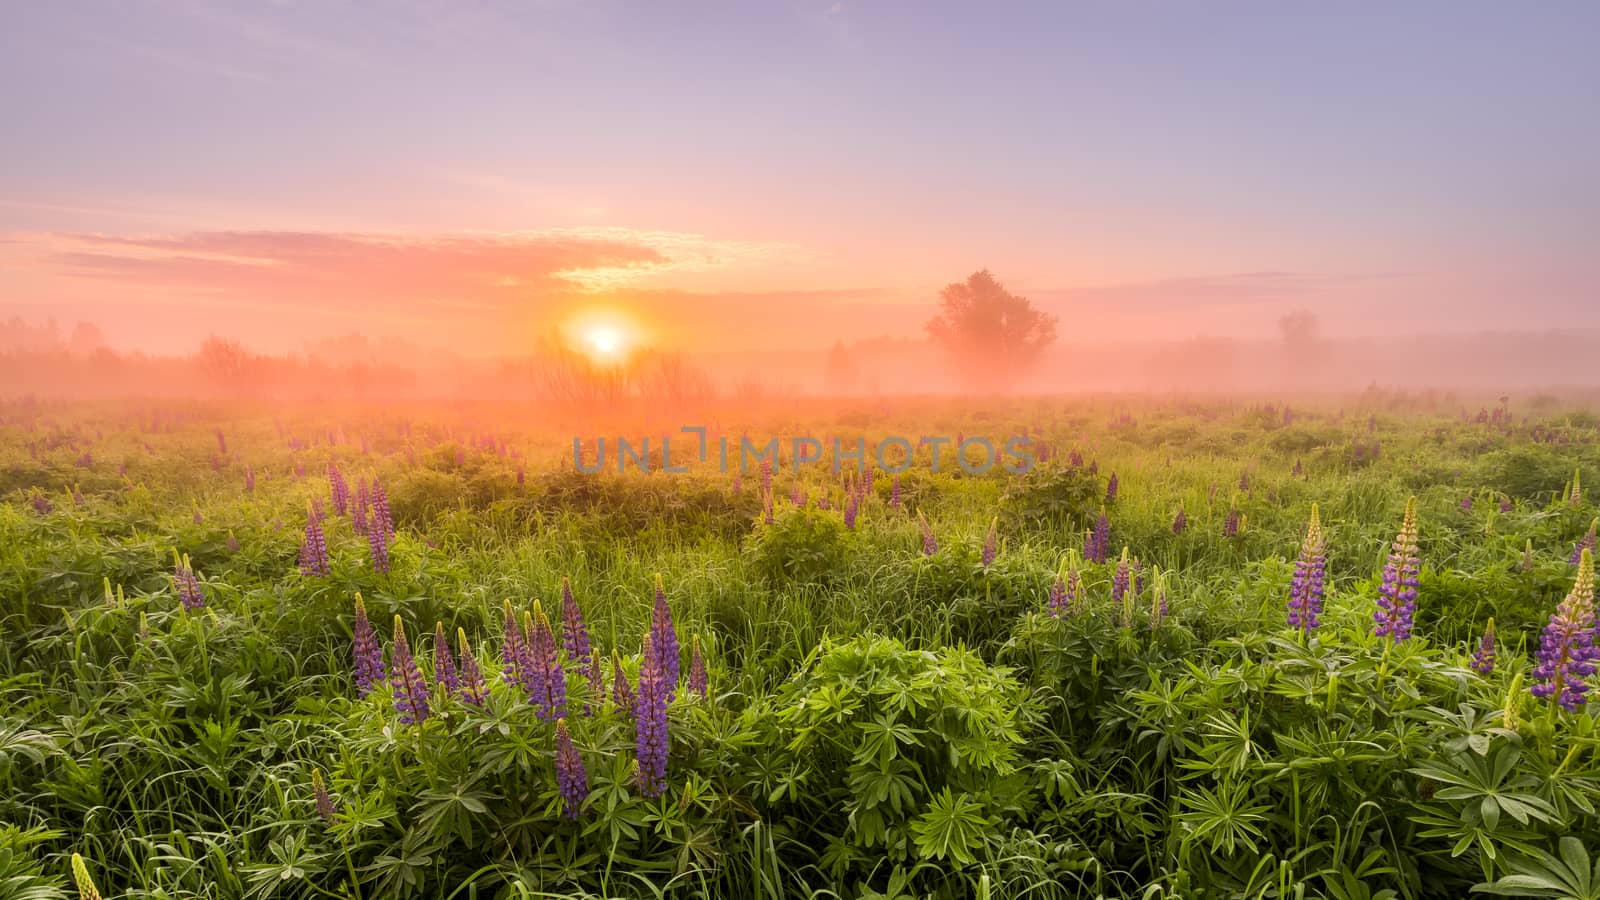 Sunrise on a field covered with flowering lupines in spring or early summer season with fog and trees on a background in morning. Panorama.